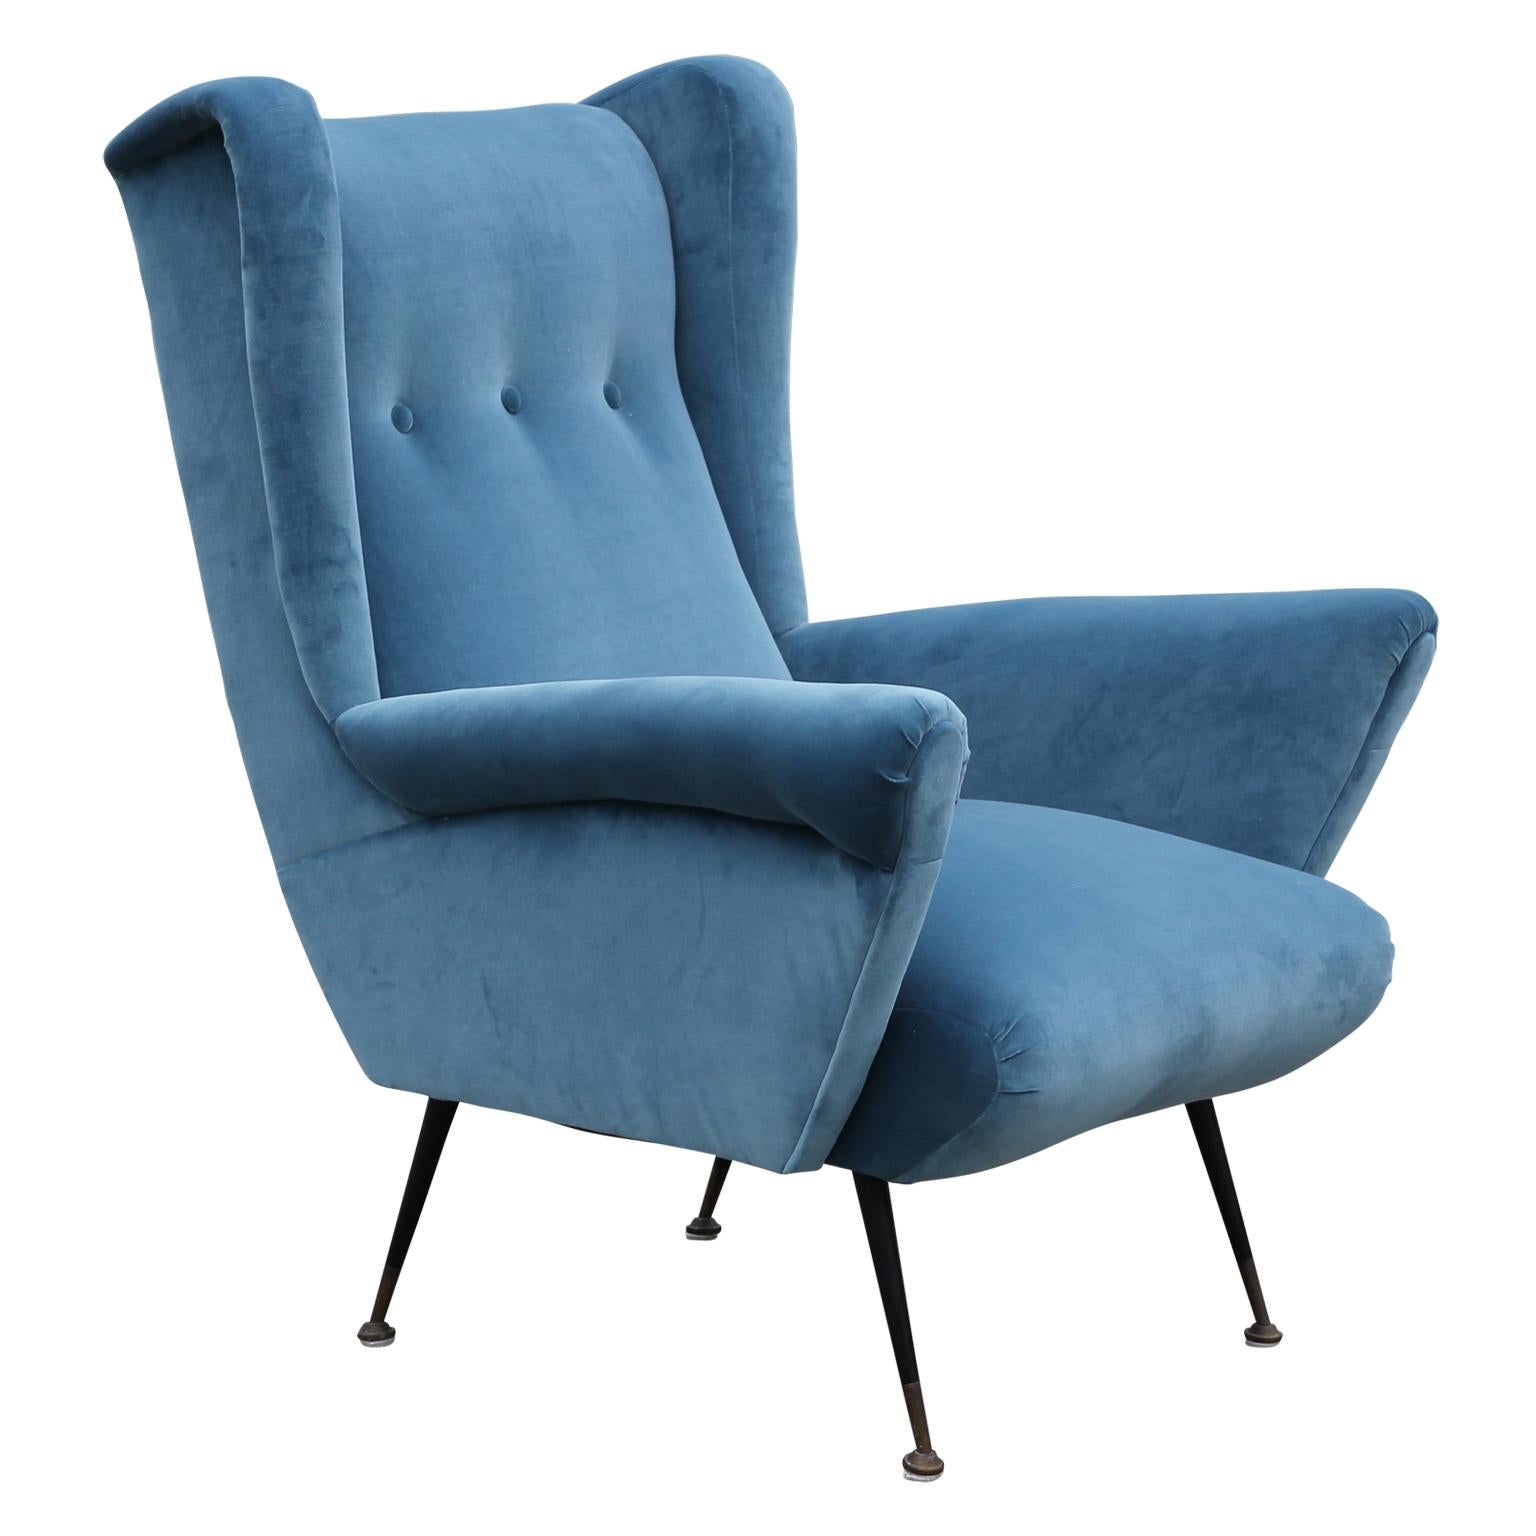 Mid-20th Century Pair of Modern Italian Wingback Lounge Chairs in Blue Velvet